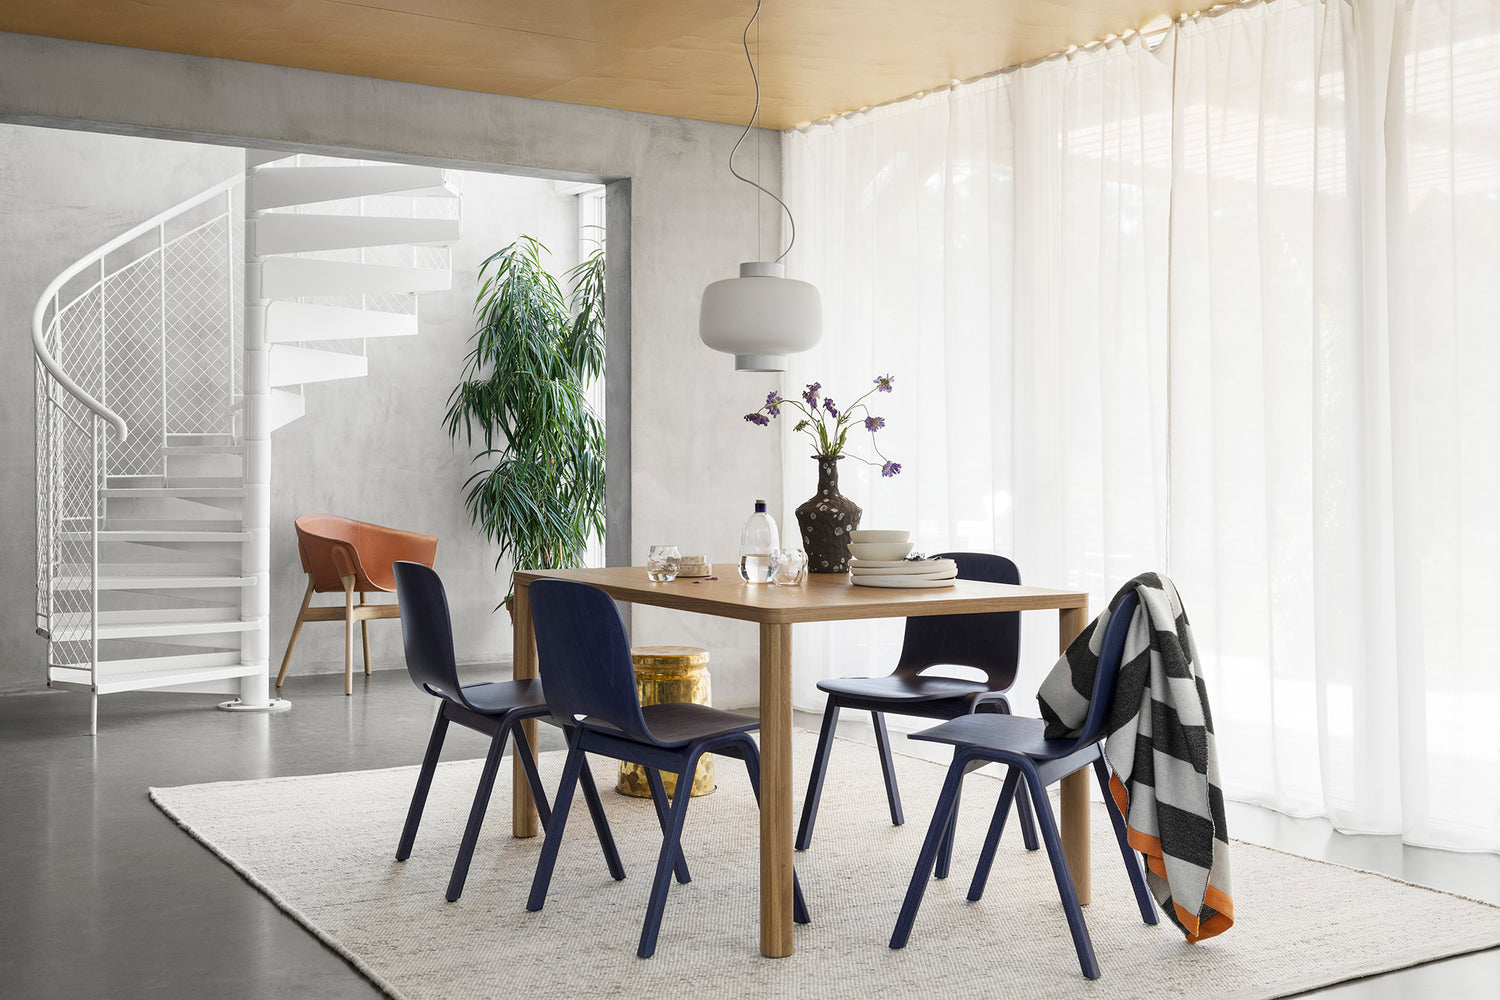 Hem - dining room scene featuring Dune Rug, Dusk Lamp Large, Touchwood Chairs and Log Table.